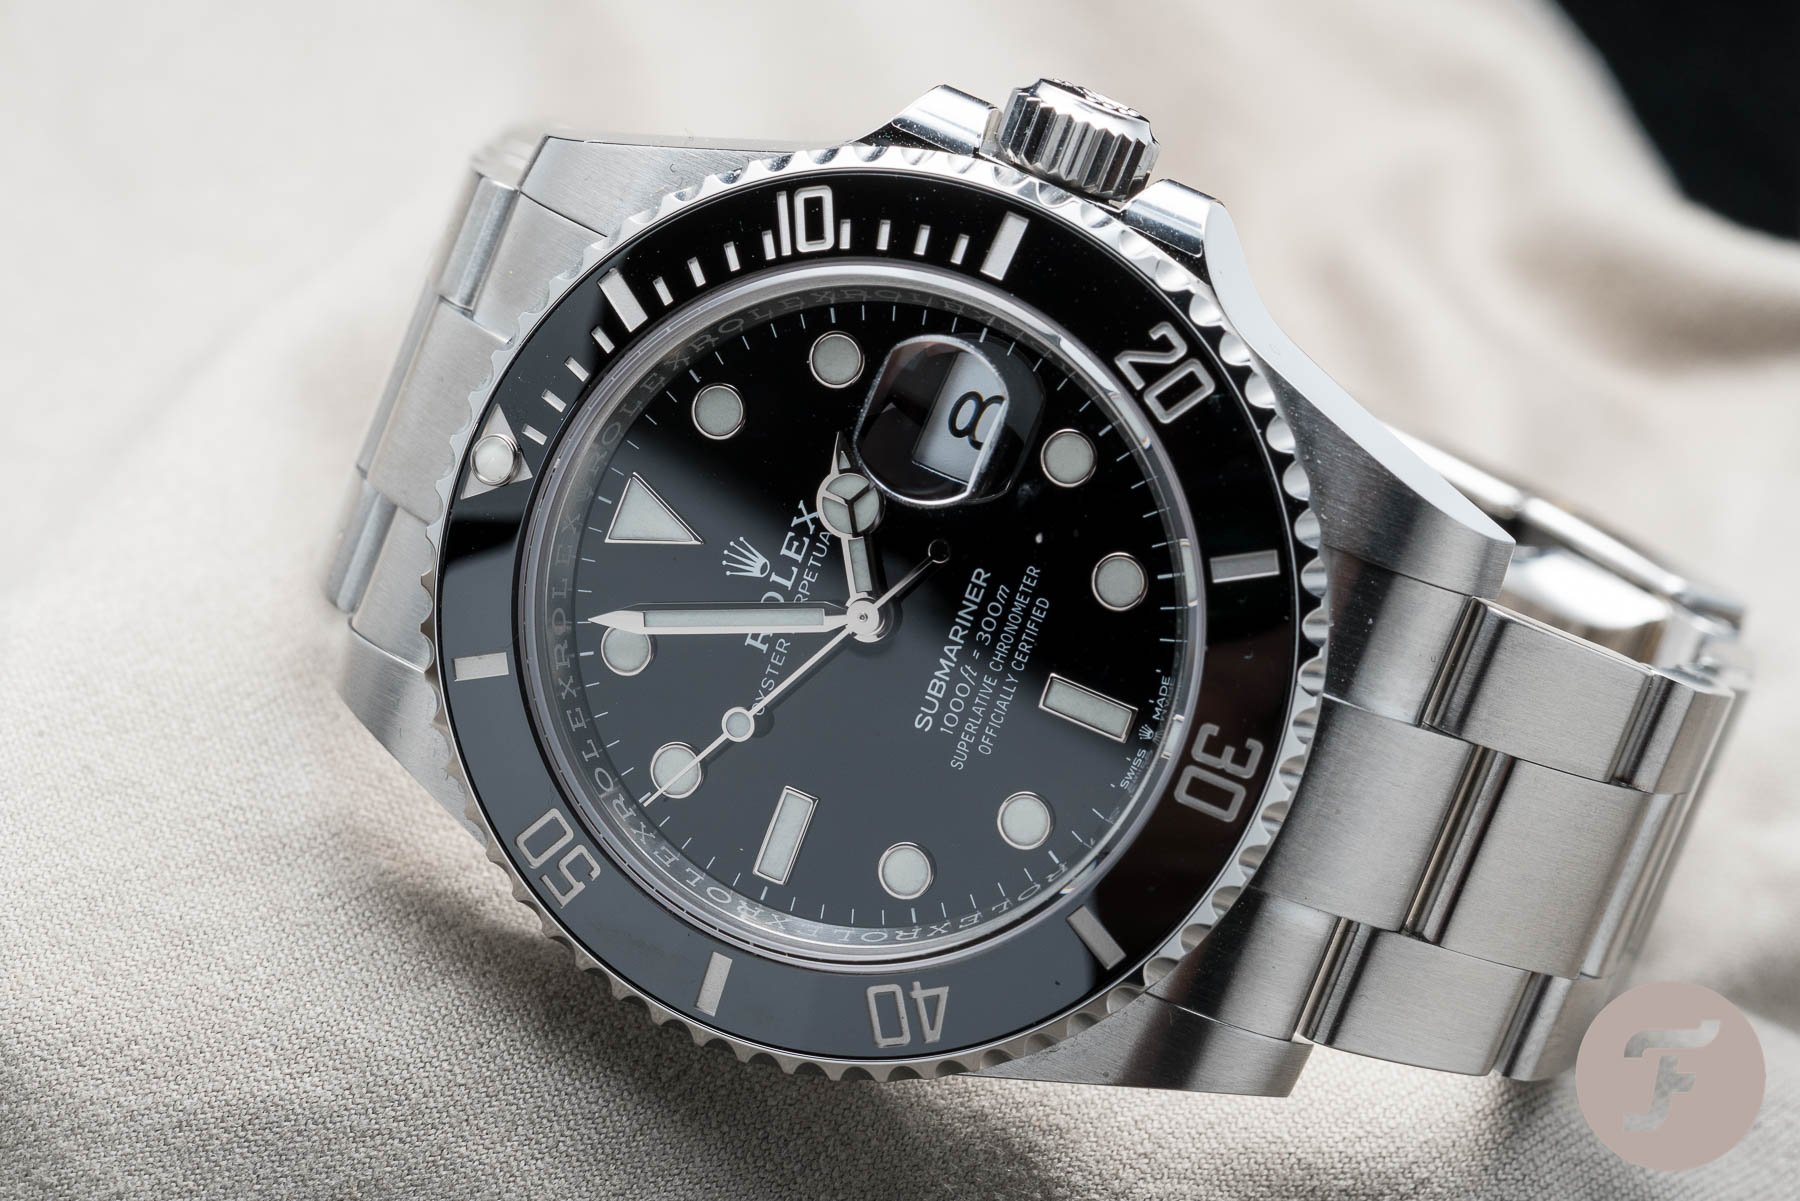 Top 10 Rolex Watches - Overview of Models Favoured By Our Readers